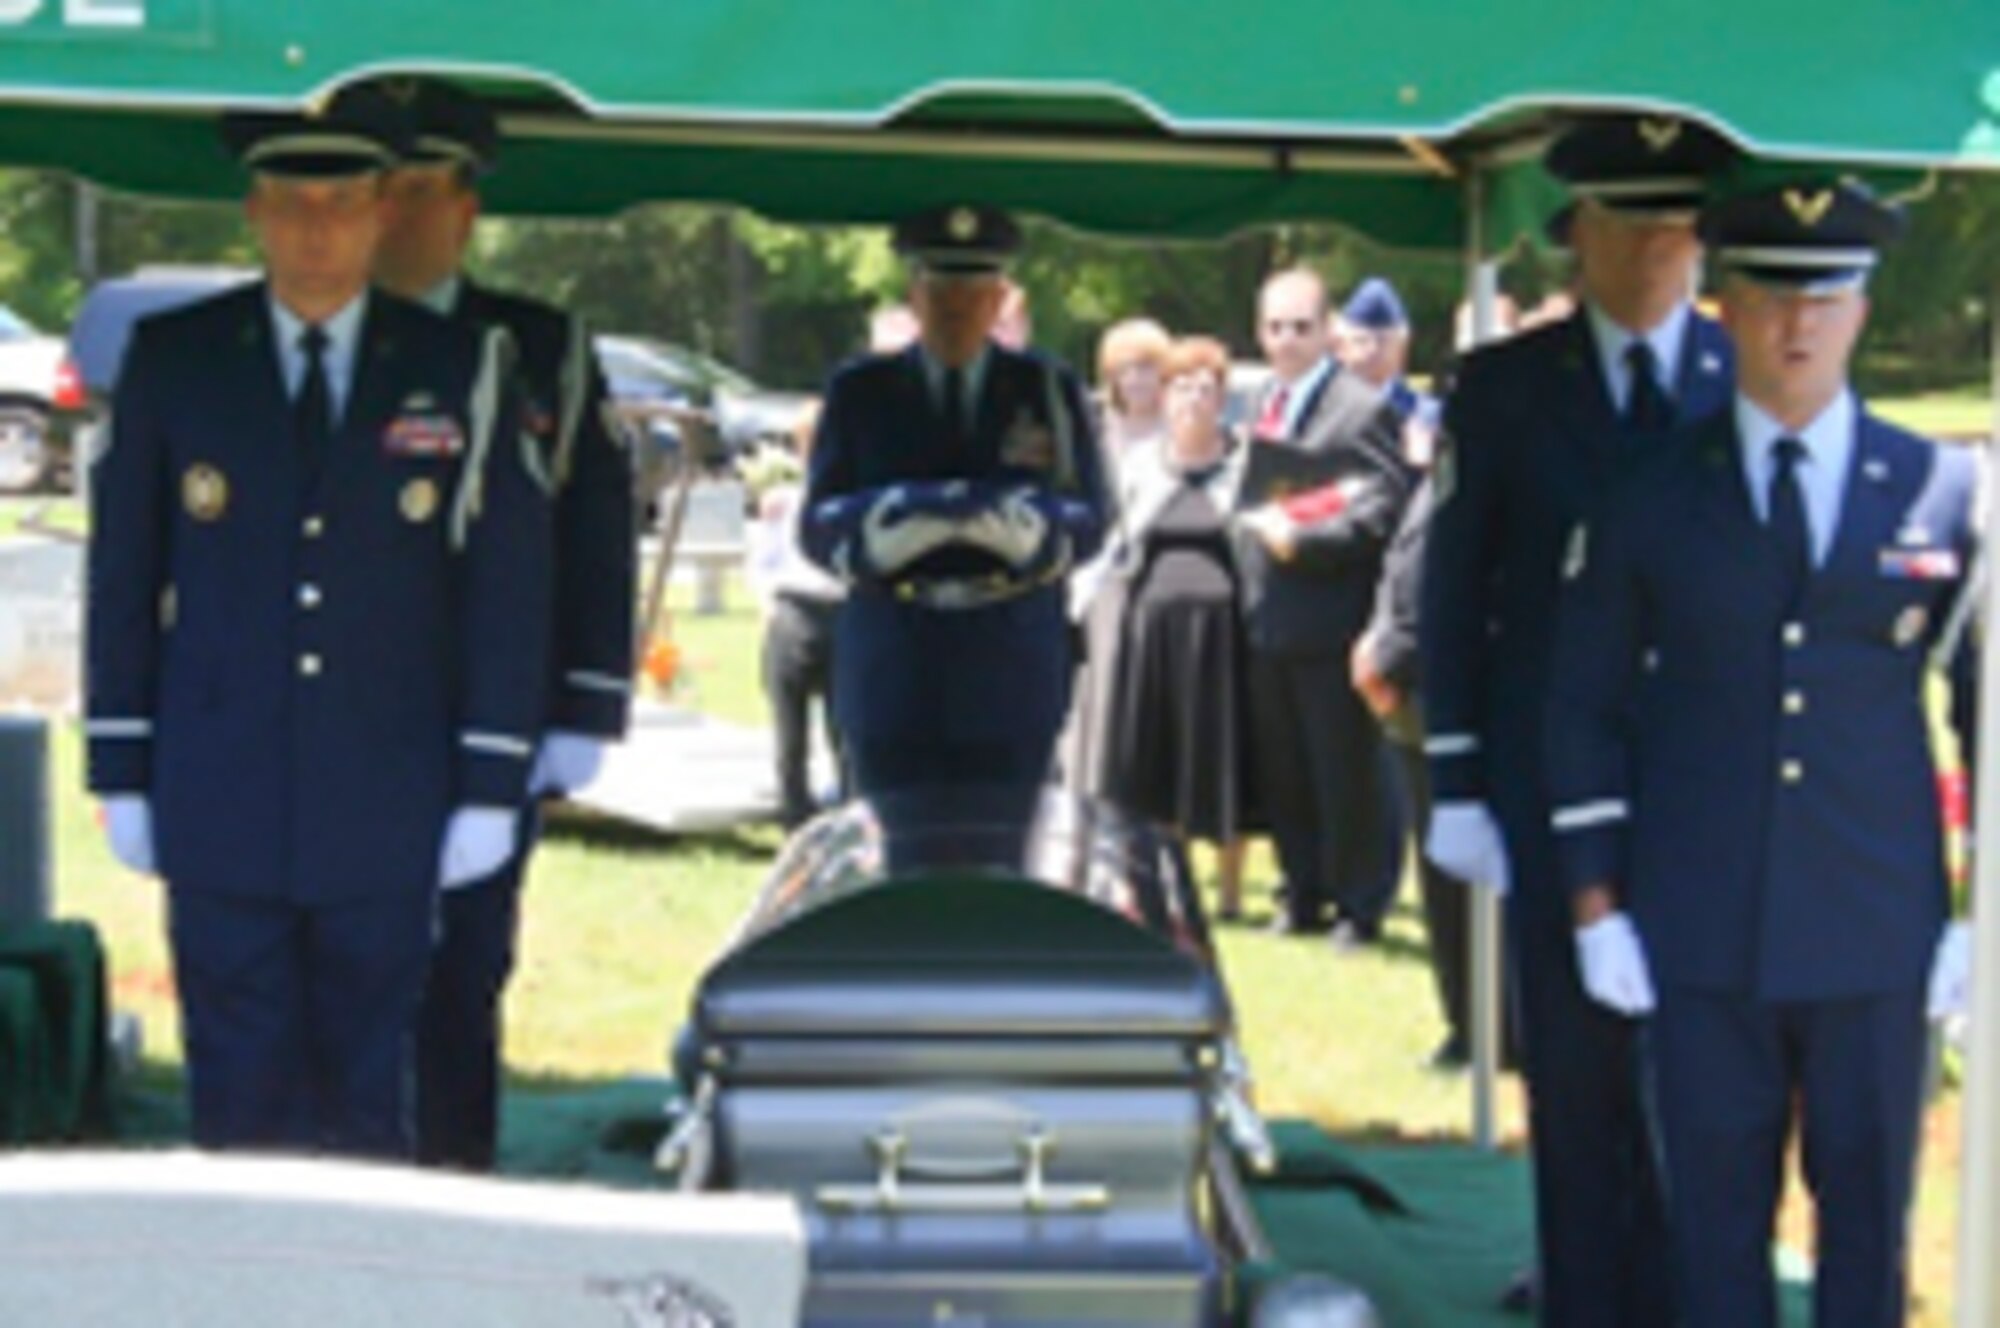 117th Air Refueling Wing Honor Guard, Birmingham, Alabama perform graveside funeral detail. (U.S. Air National Guard photo by 117 ARW Honor Guard/Released)